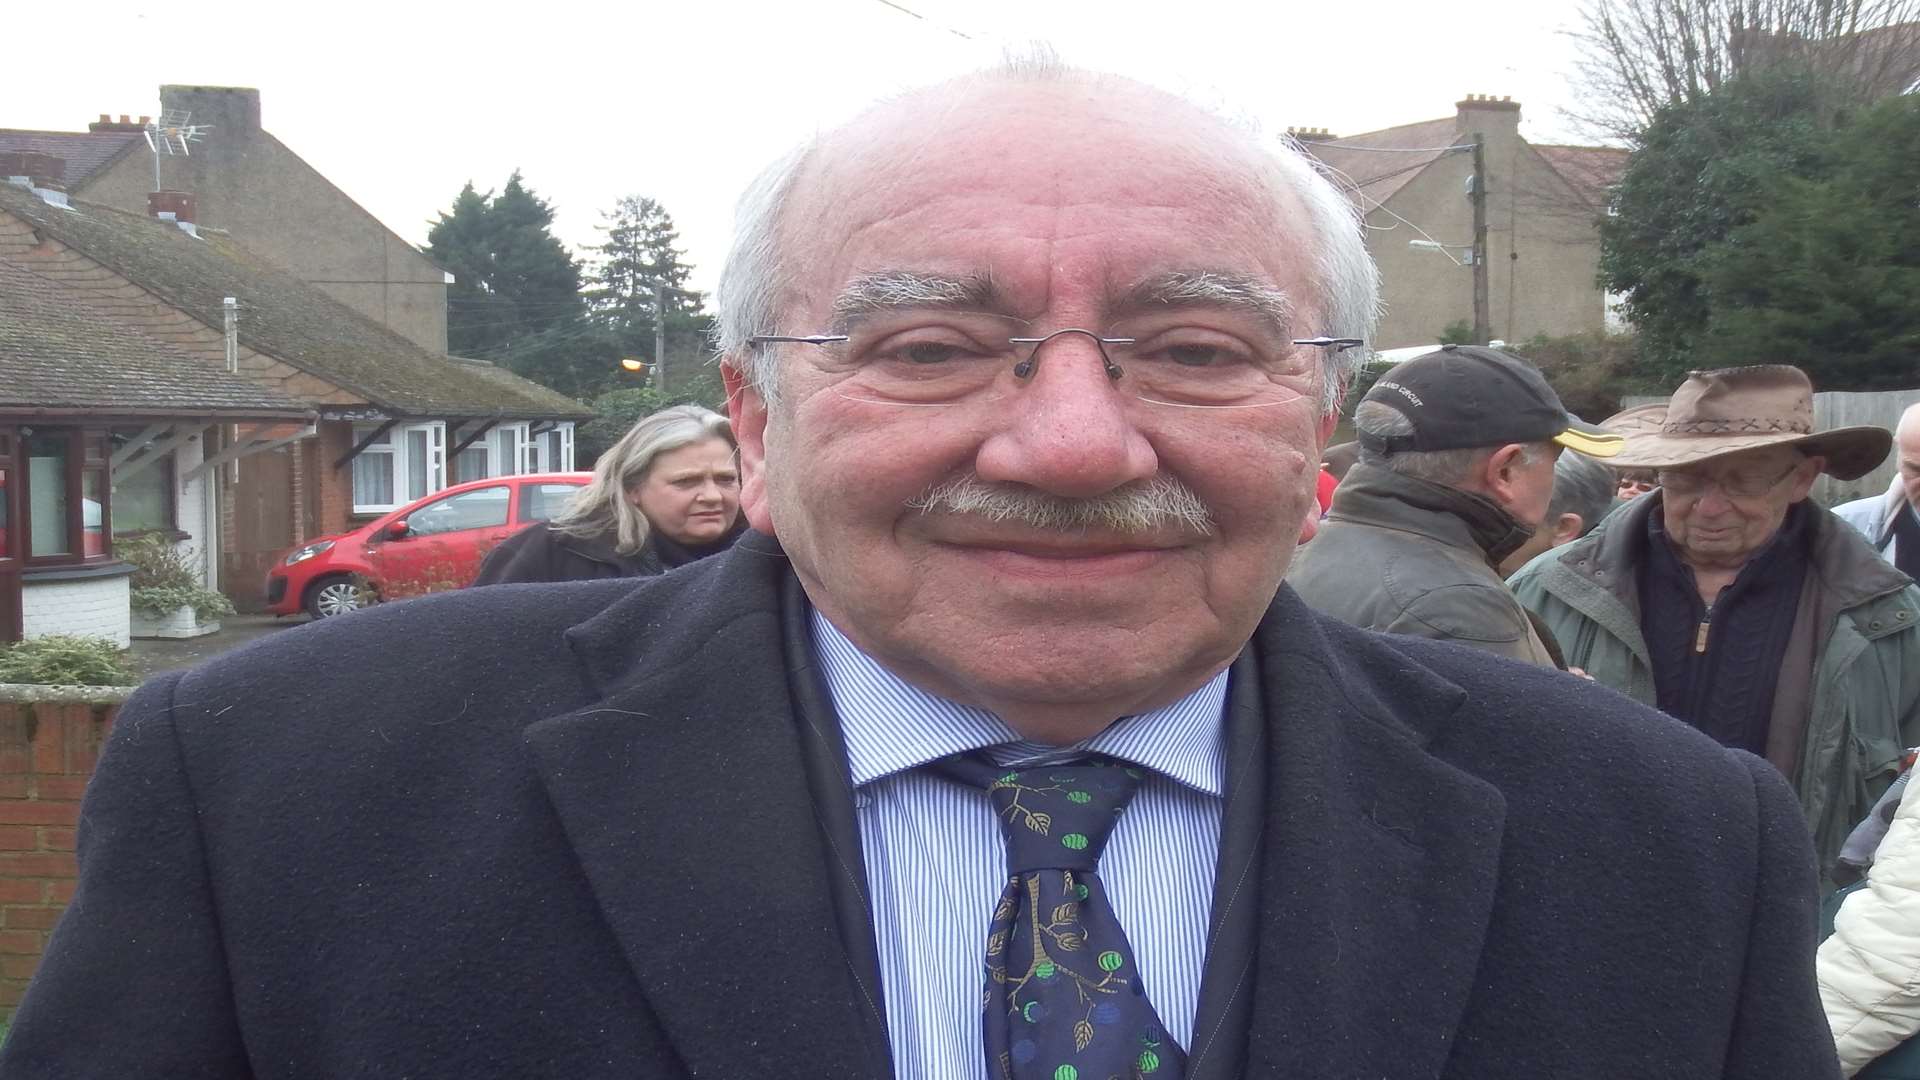 Cllr Harold Craske said "Gravesham will be a poorer place without him".